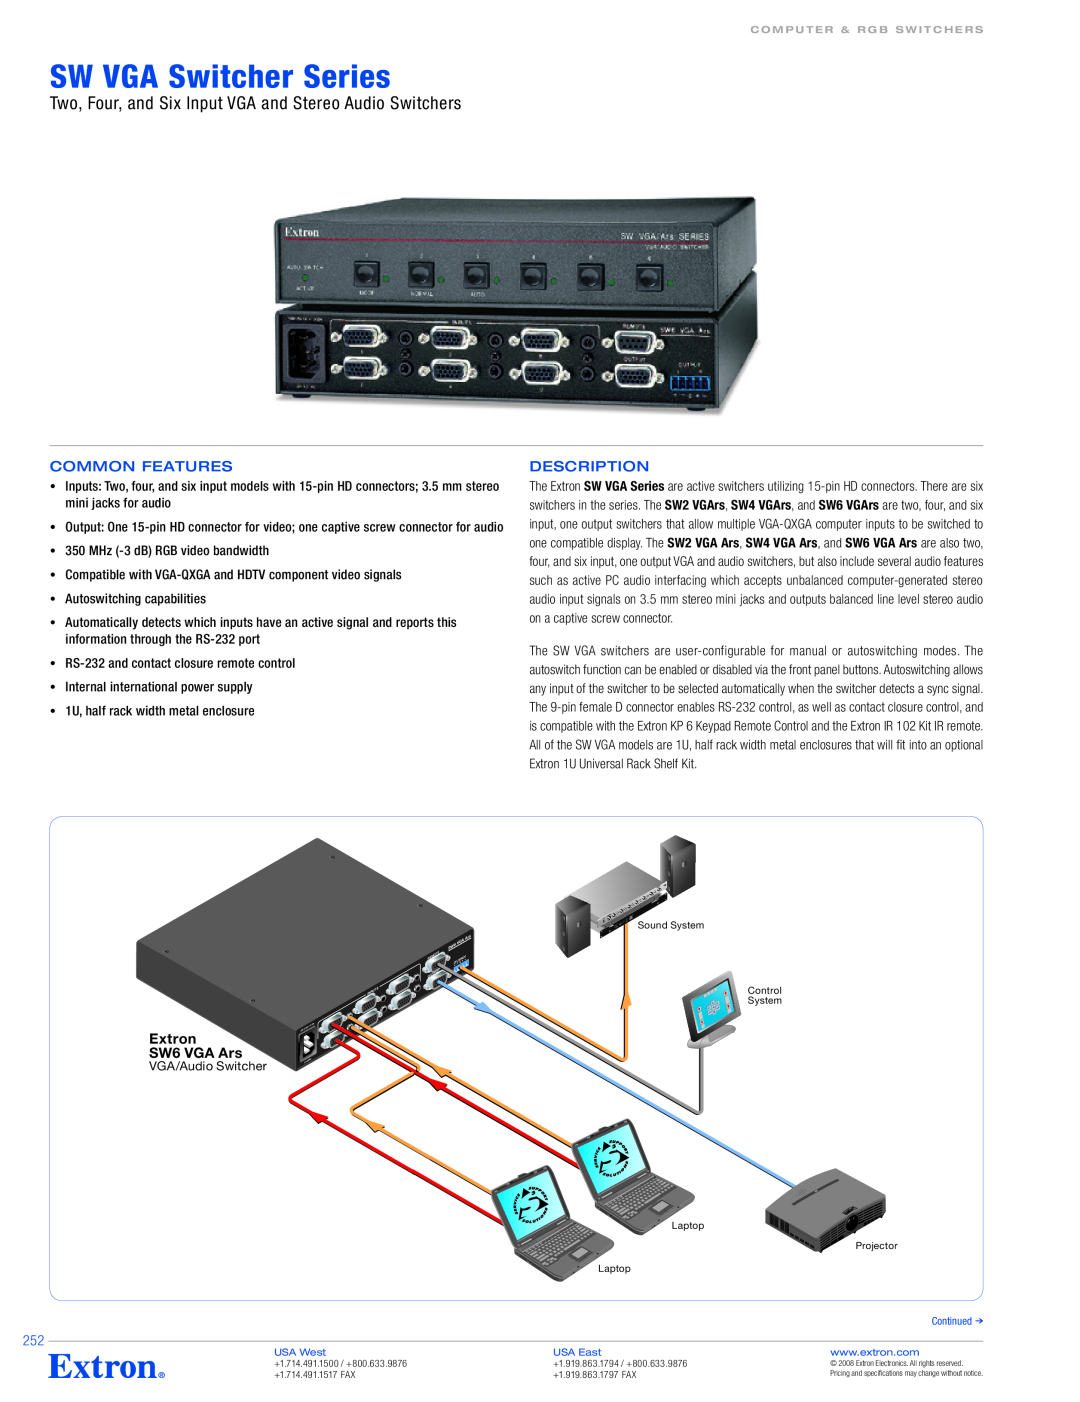 Extron electronic SW VGA Series specifications SW VGA Switcher Series, Common Features, Description, Extron SW6 VGA Ars 